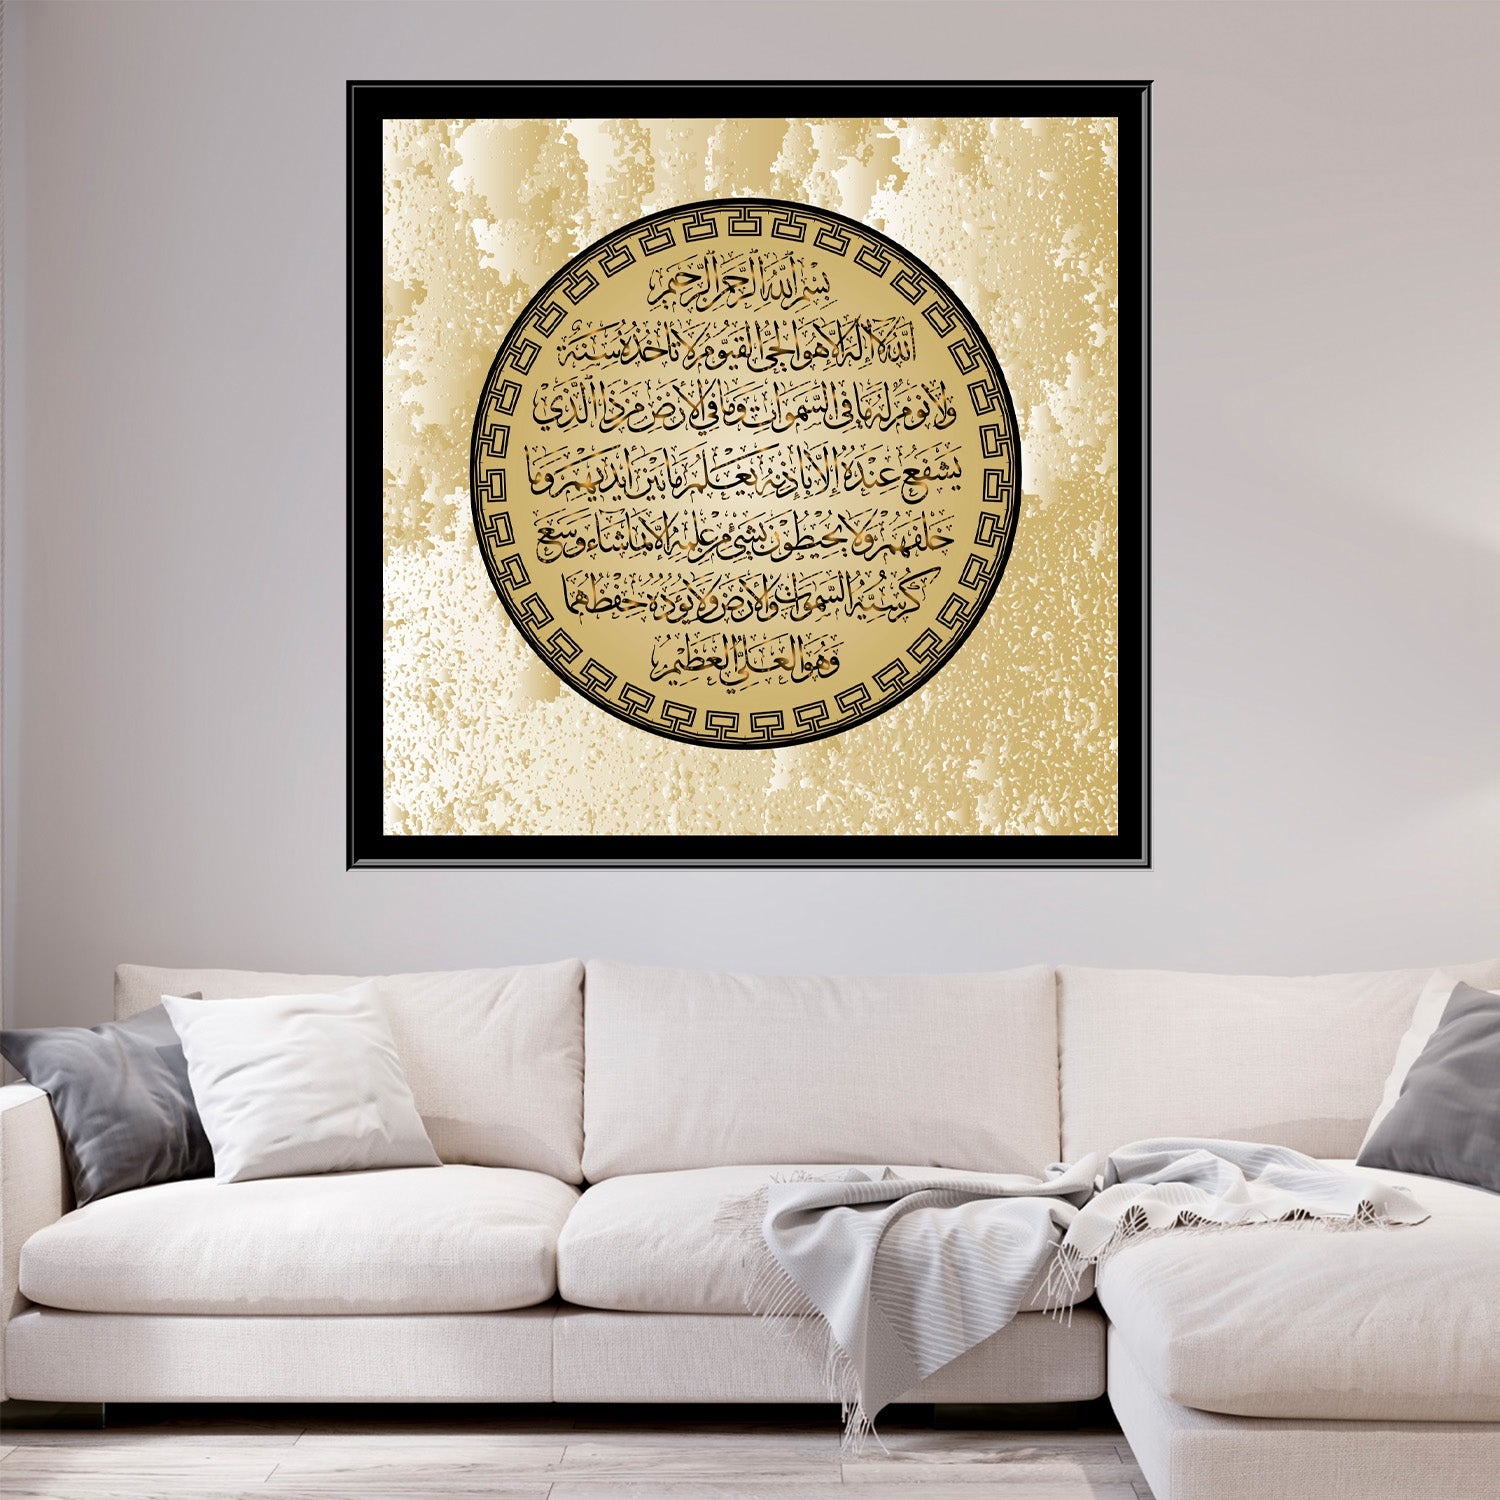 https://cdn.shopify.com/s/files/1/0387/9986/8044/products/255AyahIslamicLimitedEdition10CanvasArtprintStretched-4.jpg